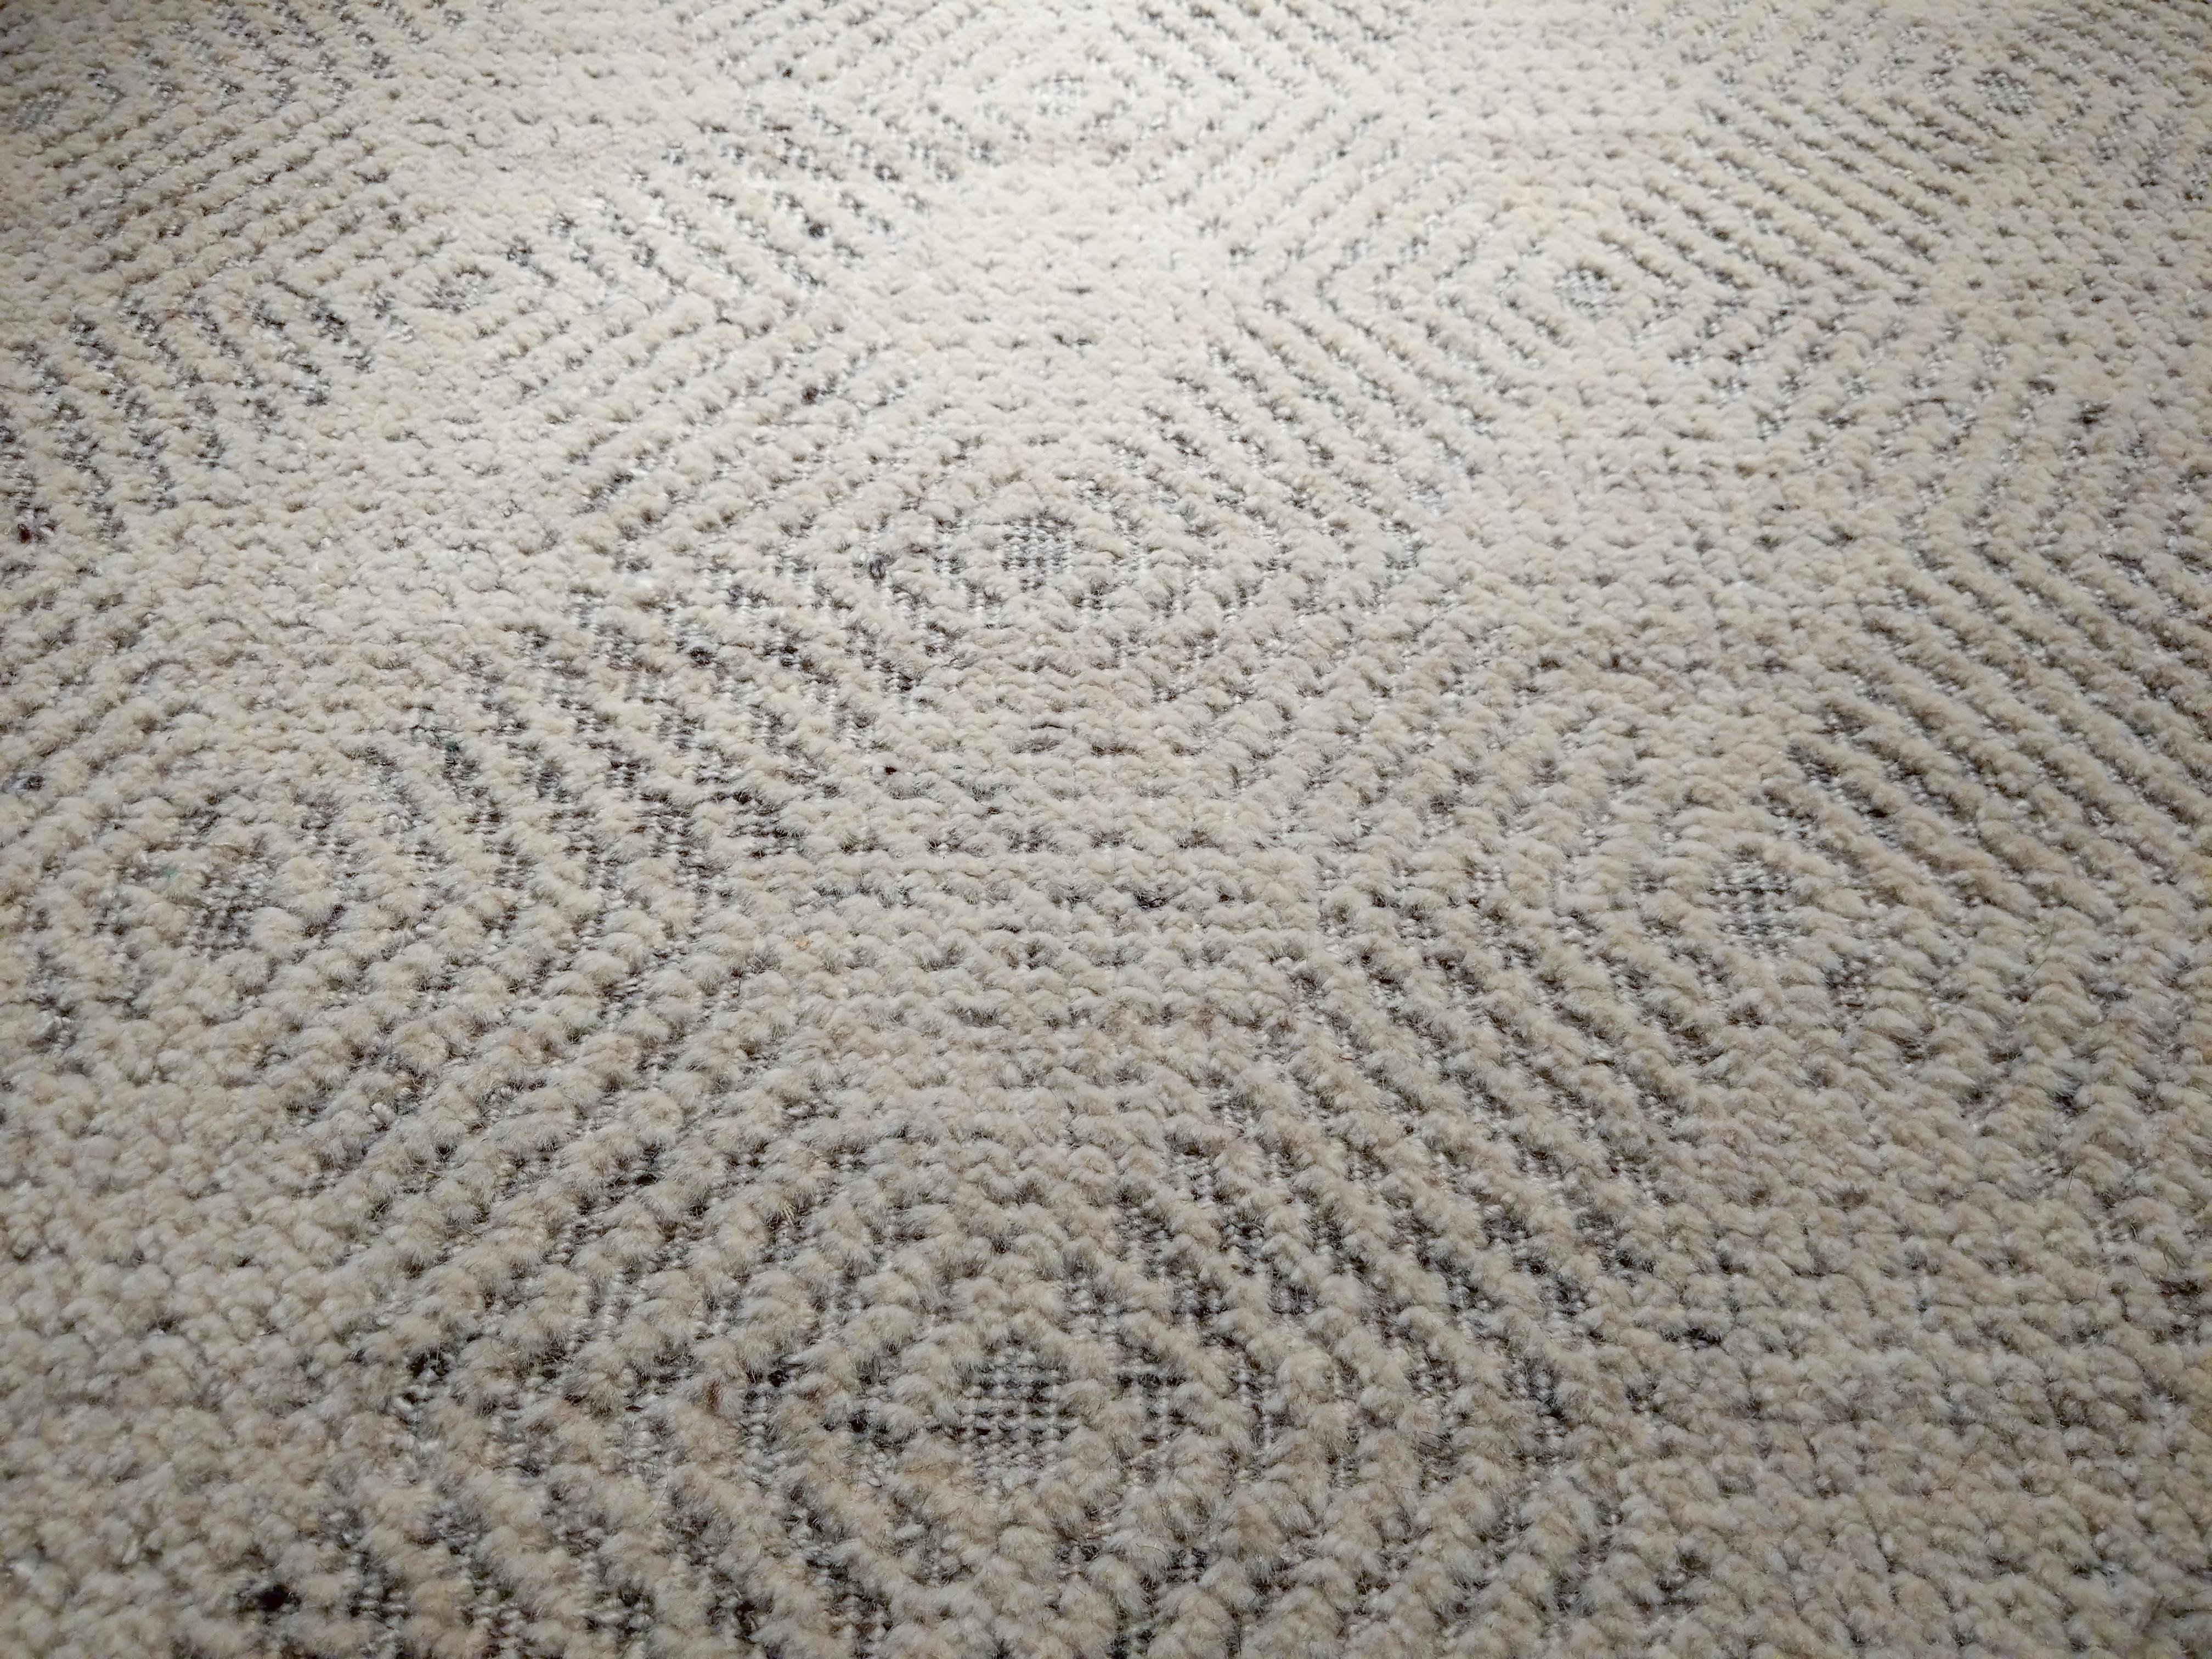 Inspired by the traditional rugs from the Island of Sardinia, Maddalena is hand knotted in pure wool and distinguished by an all-over pattern of ivory lozenges on a high-low textured background in ivory and light grey. The resulting palette makes it